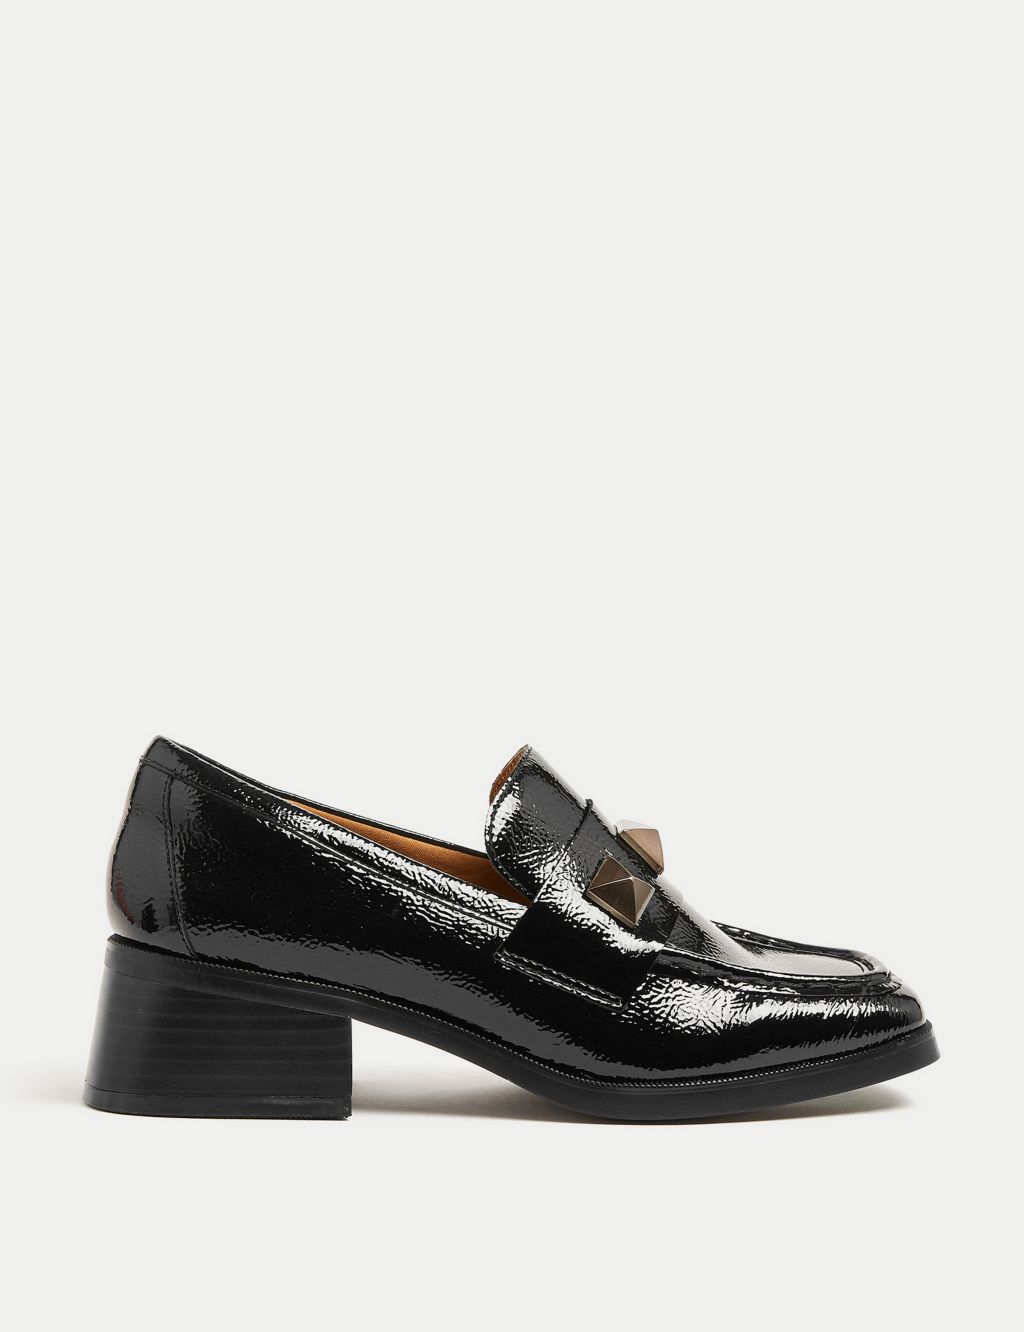 Wide Fit Leather Patent Block Heel Loafers image 1